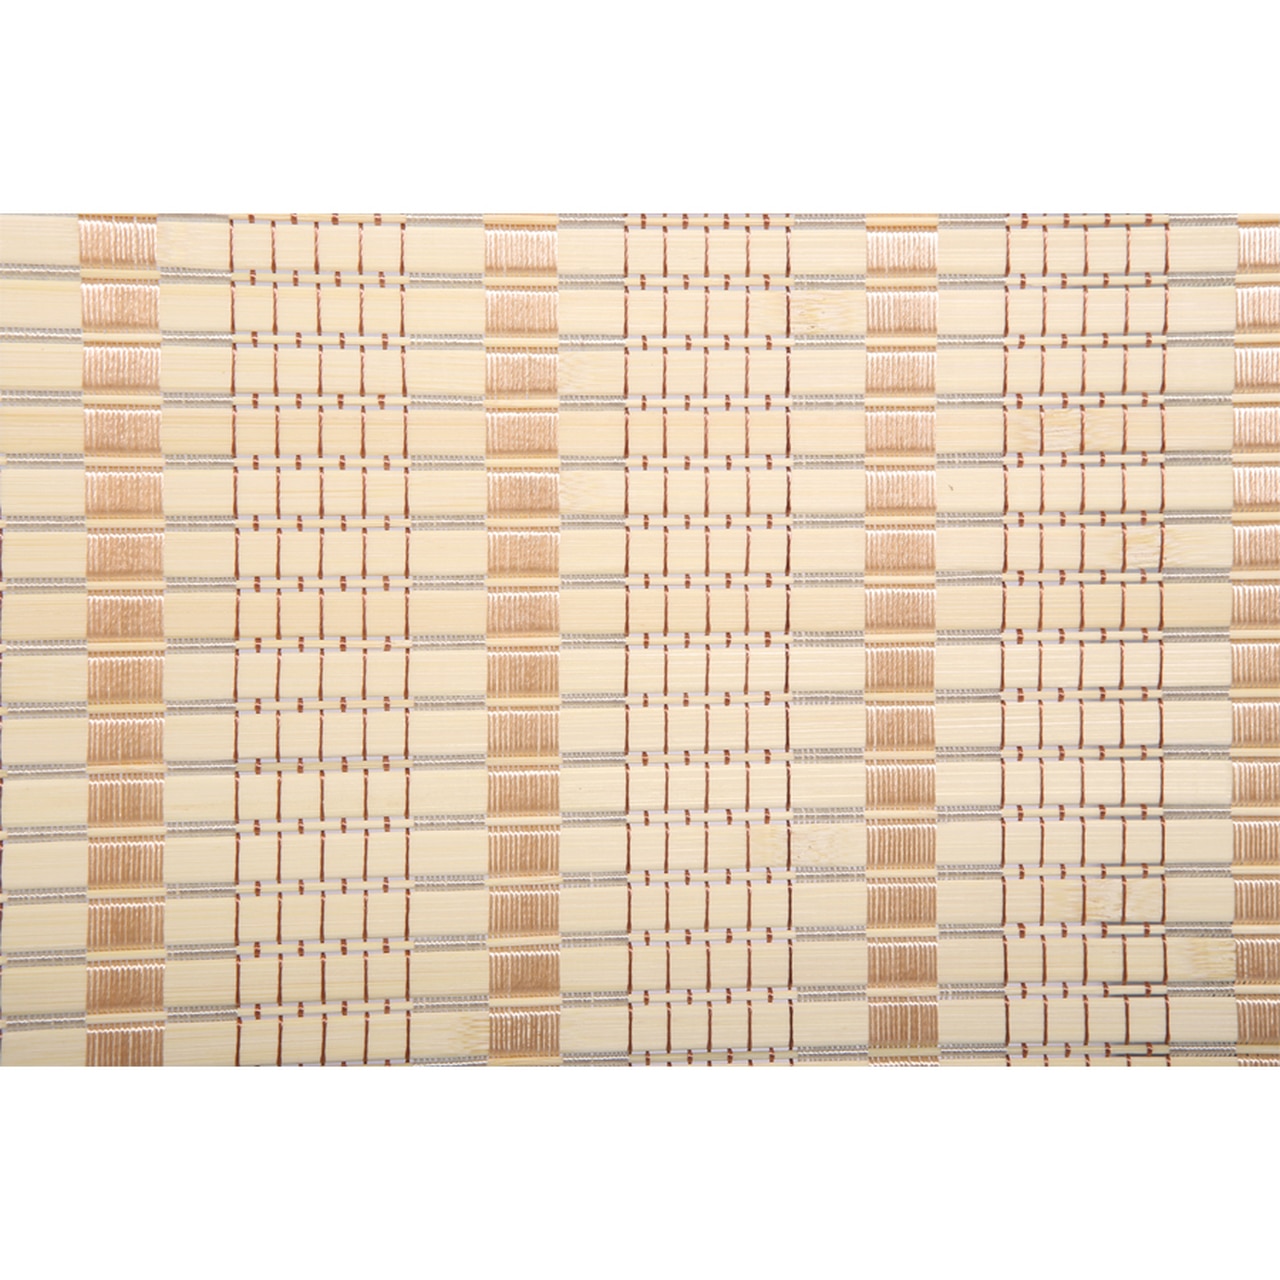 Legacy Decor Wood and Bamboo Weave 8 Panel Room Divider, 71" Tall, Natural Color - image 4 of 4